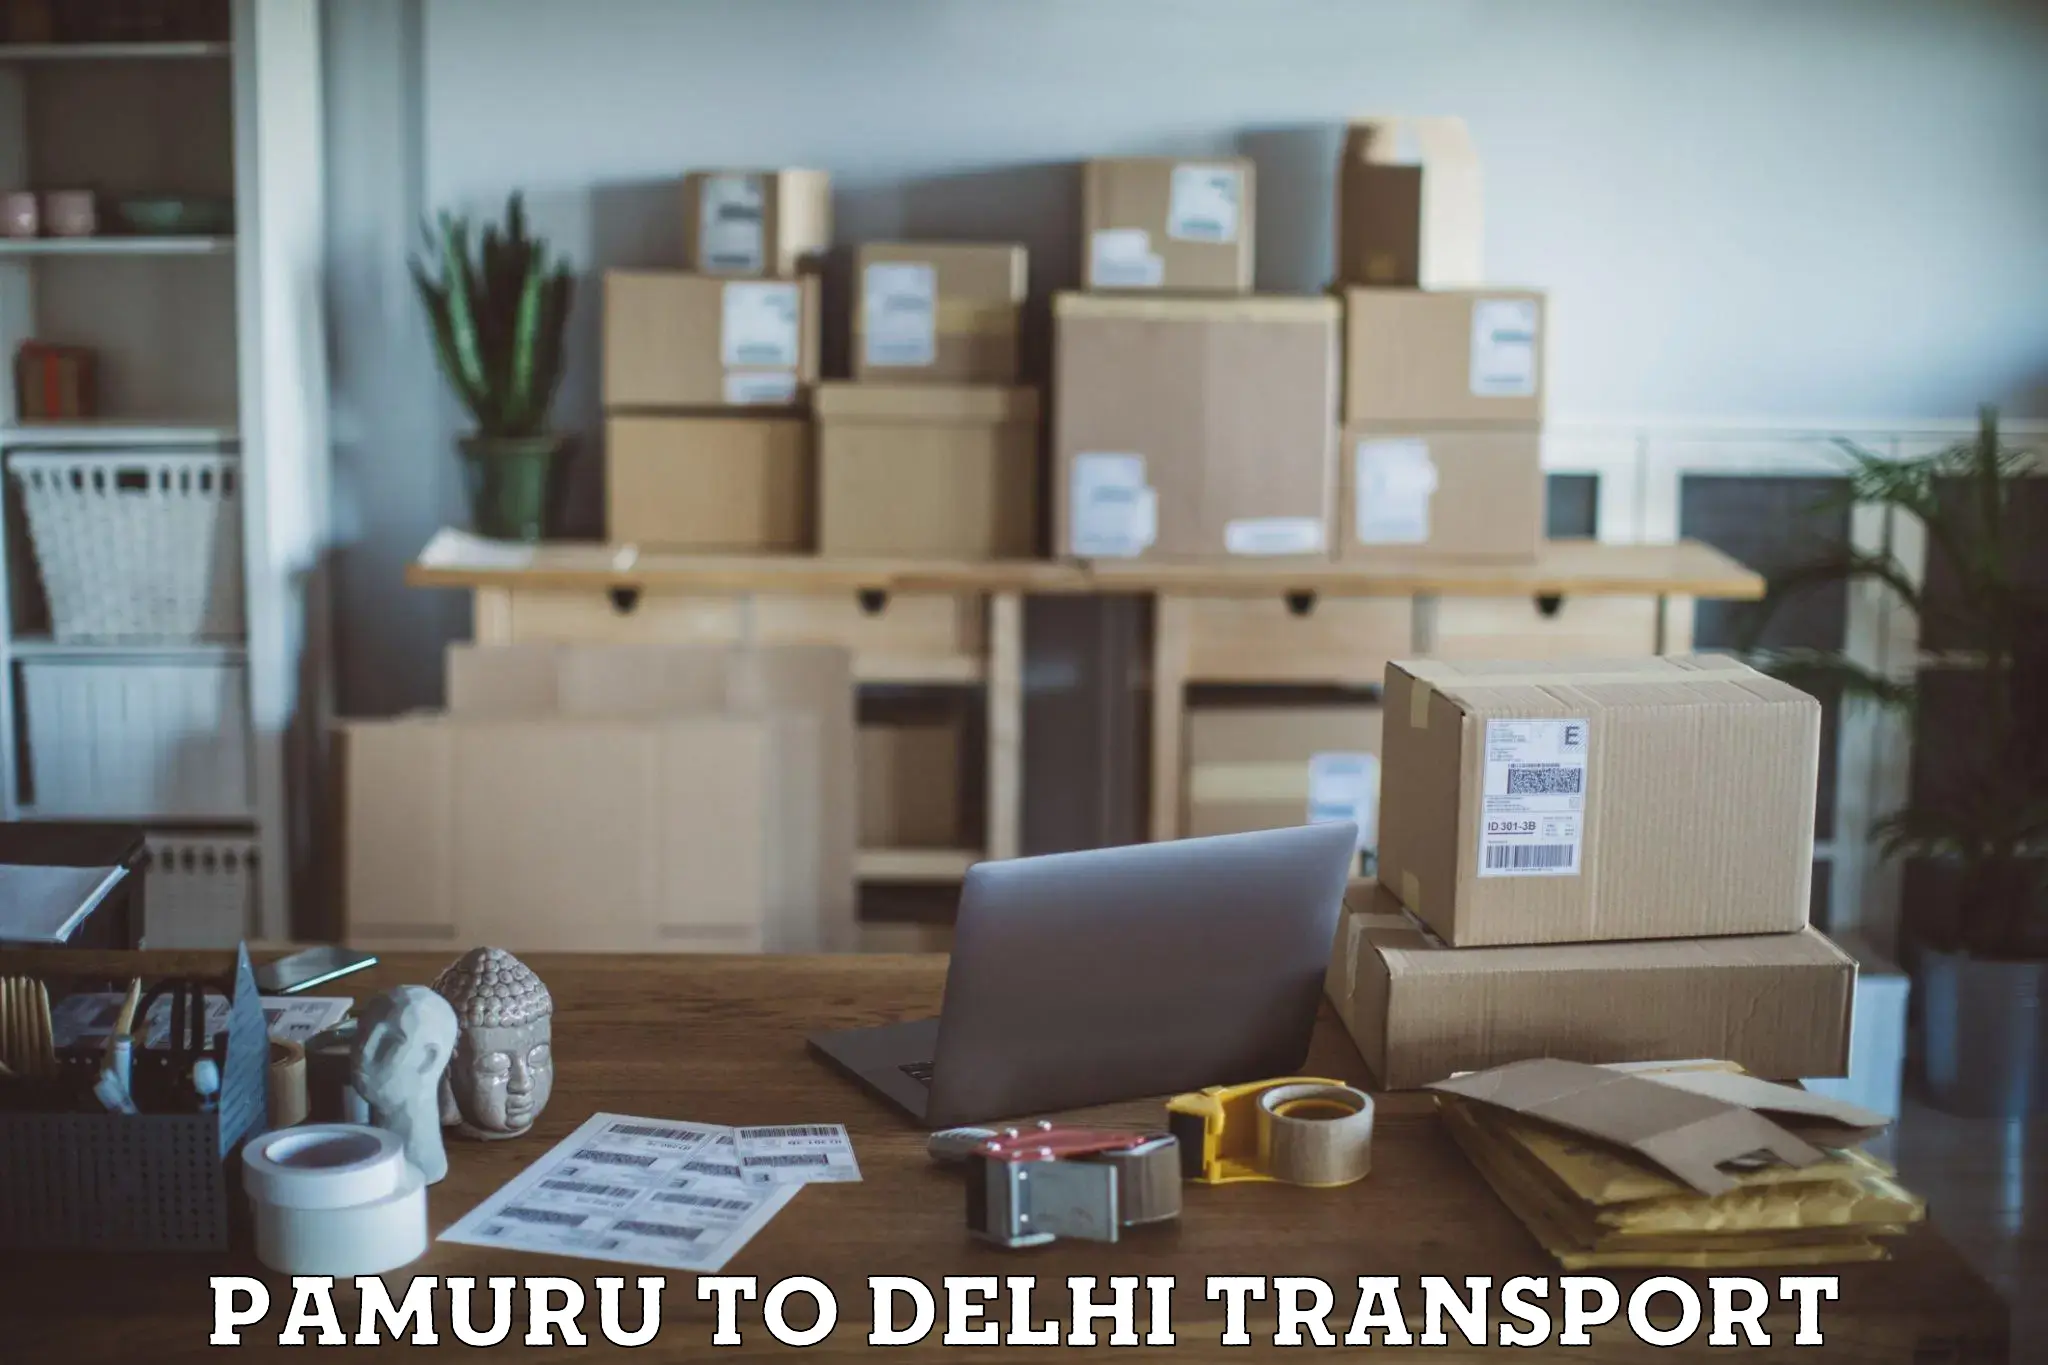 Transport bike from one state to another Pamuru to Delhi